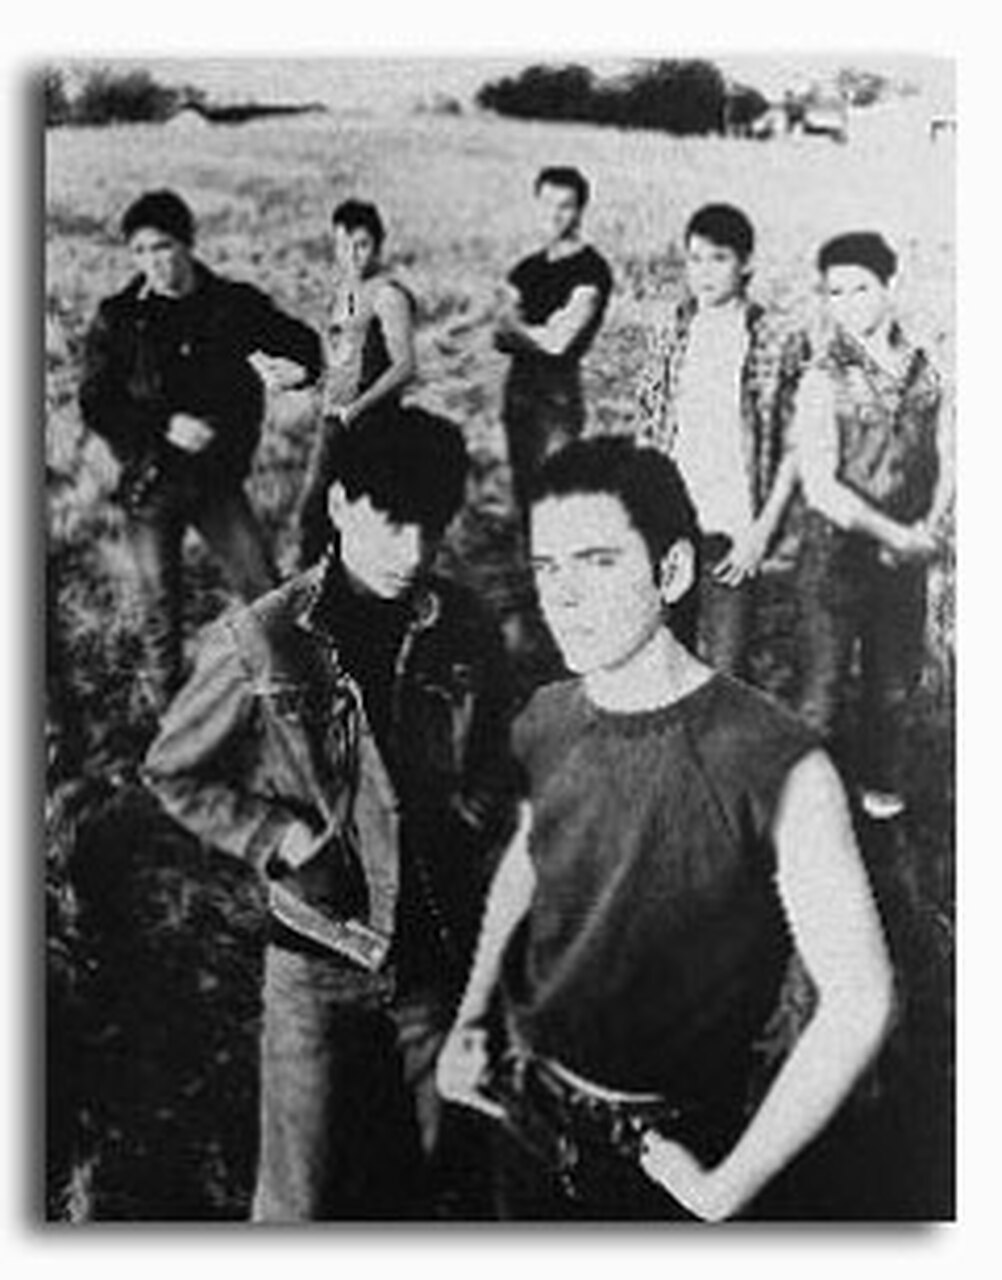 cast of the outsiders